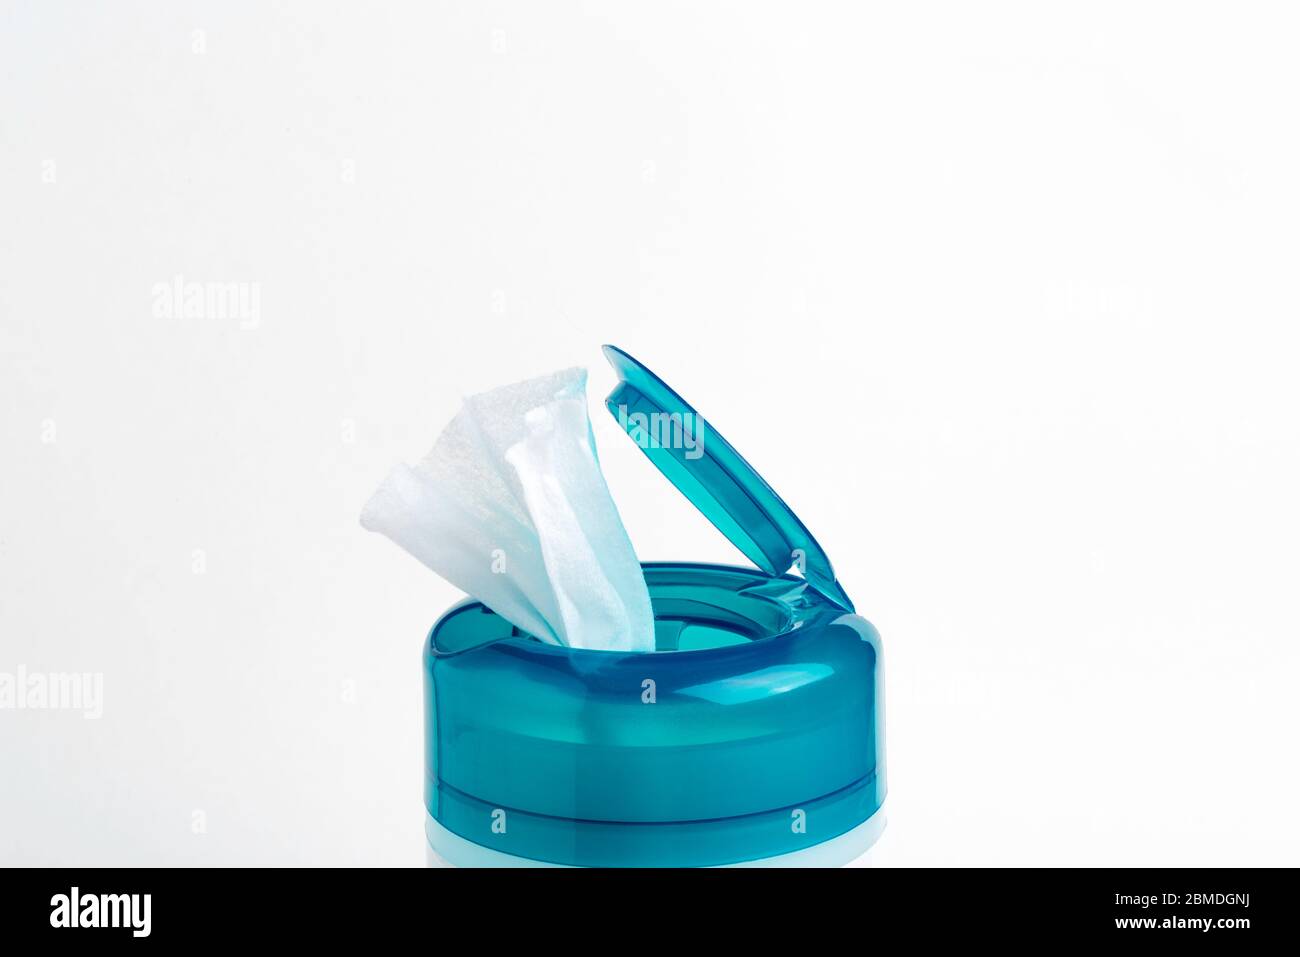 A close-up shot of an open aquamarine push top cap of a disinfectant wet wipes plastic container set on a plain white background. Stock Photo